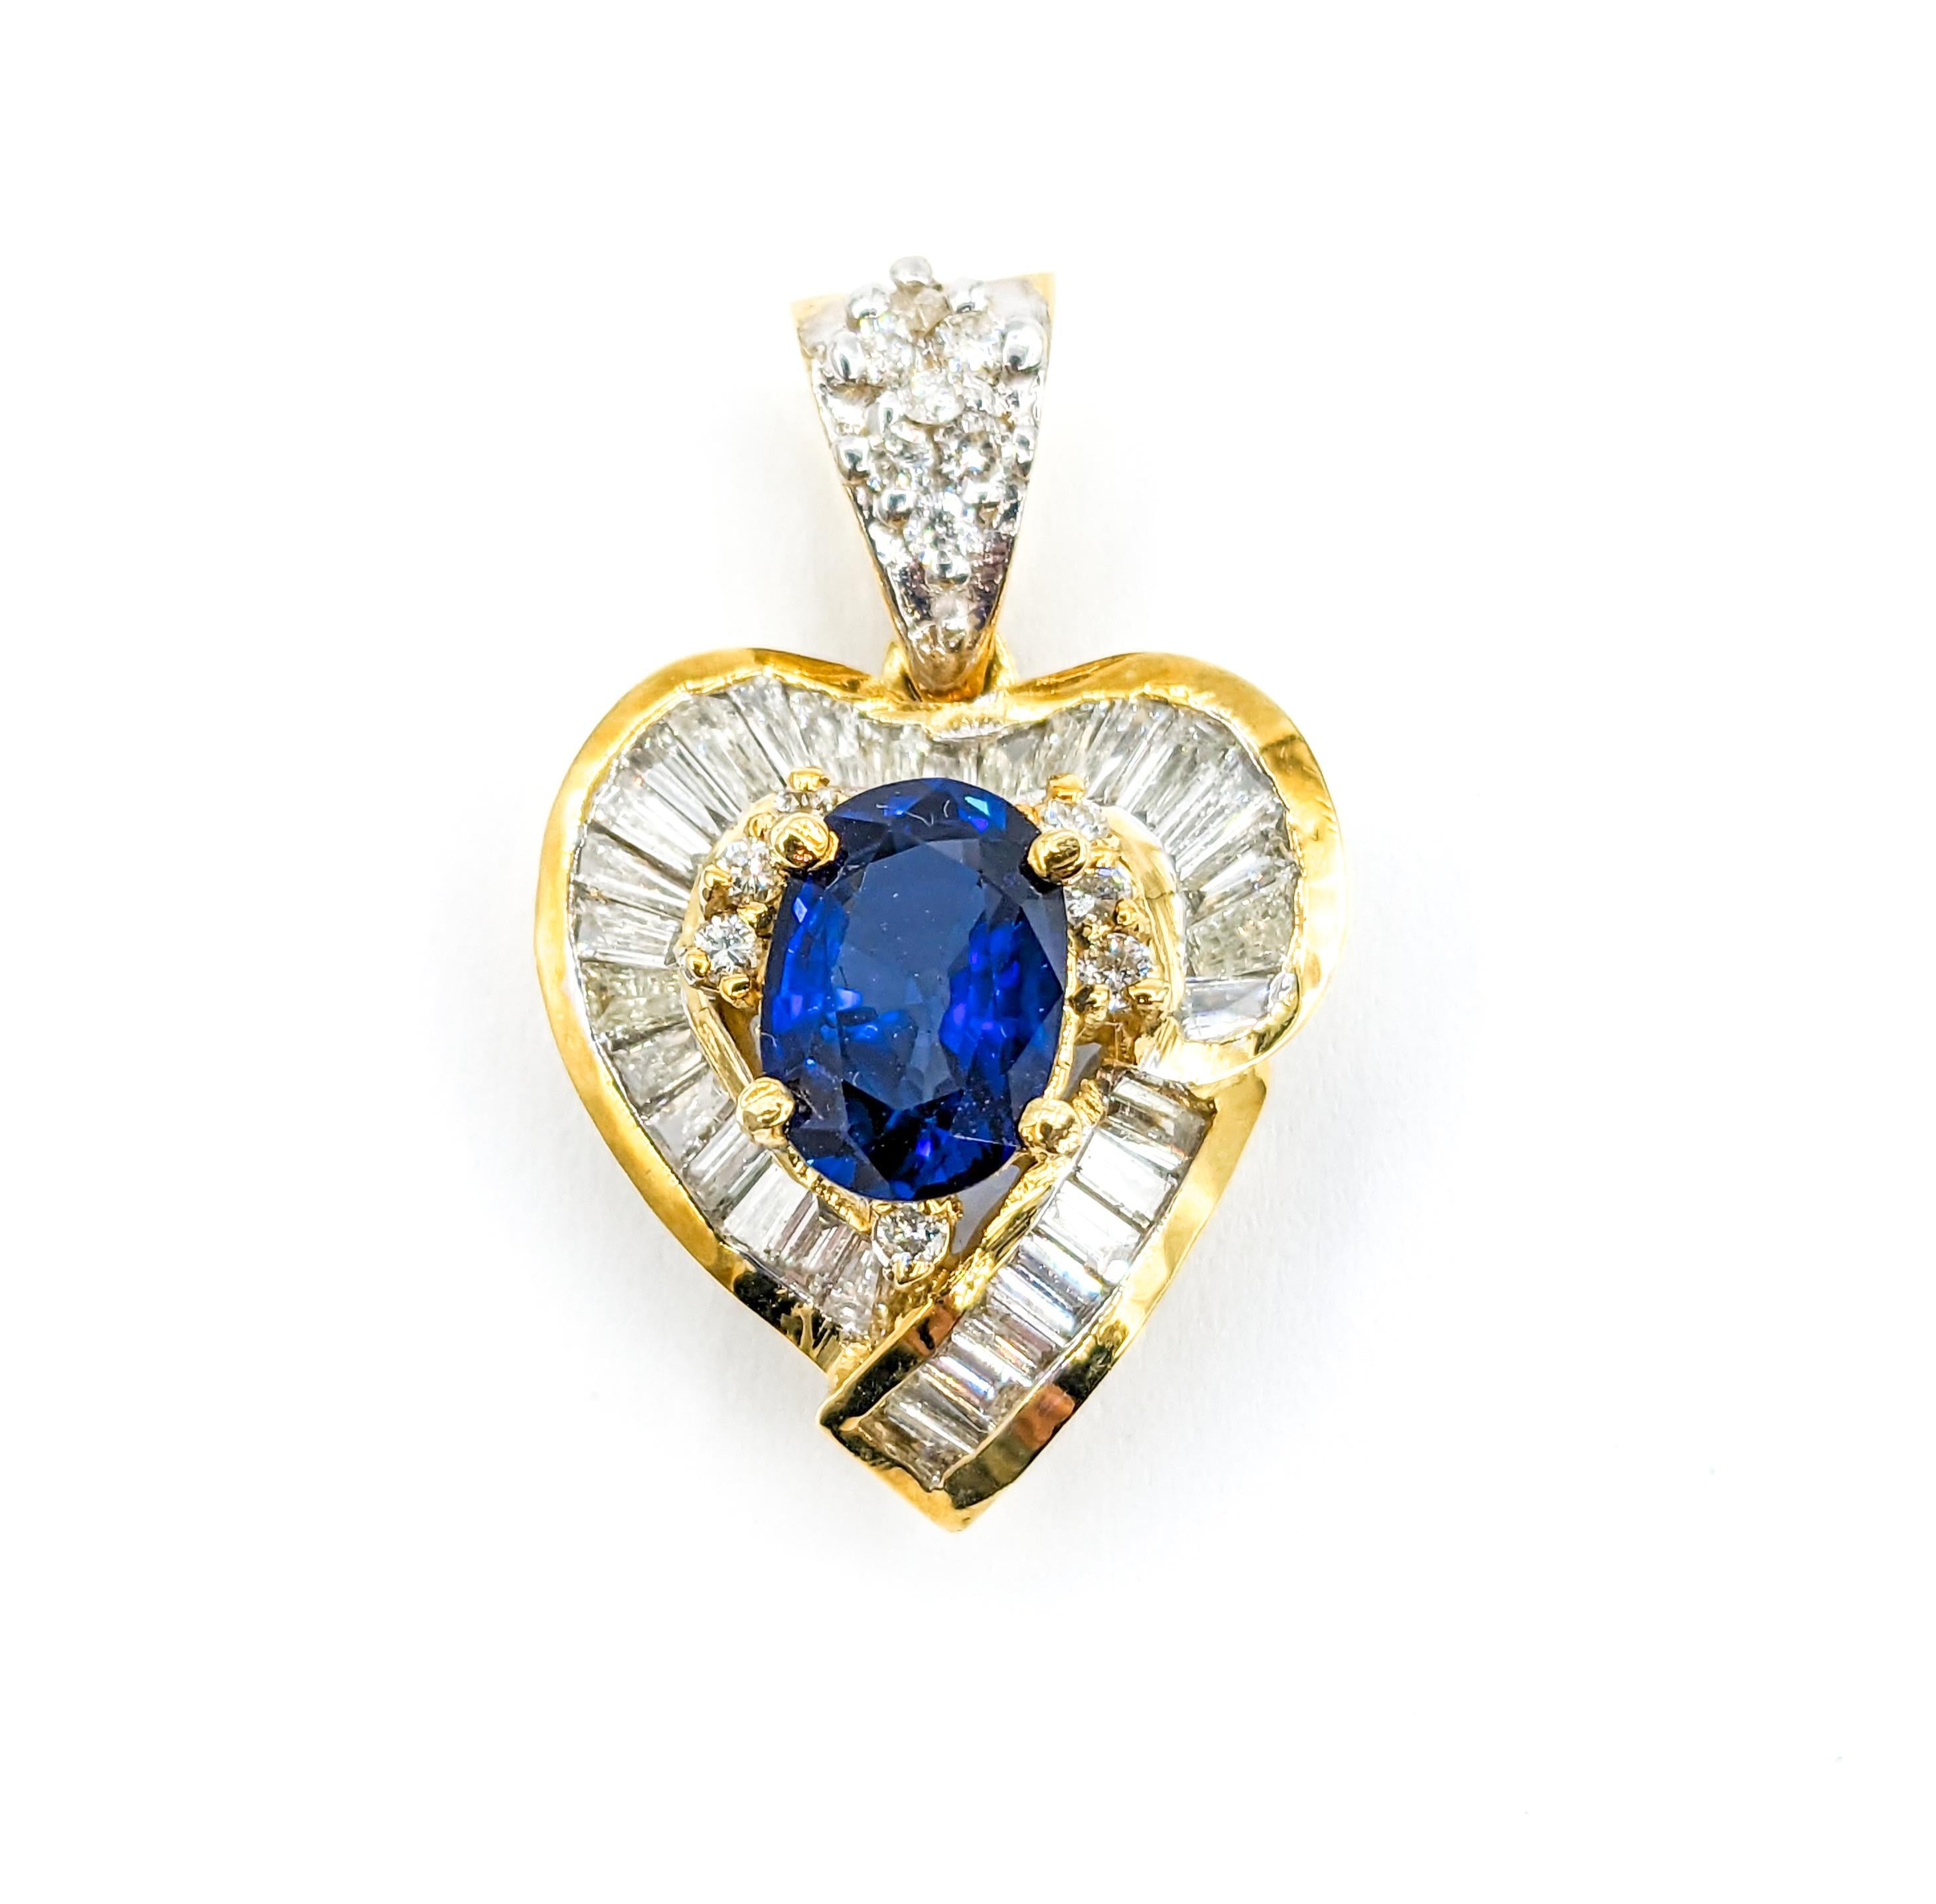 Fantastic Blue Sapphire & Diamond Heart Pendant in 18k Yellow Gold

Experience the allure of our exquisite pendant, crafted with precision in 18k yellow gold. This elegant piece showcases a stunning 2.04ct oval diffused Sapphire, radiating a deep,